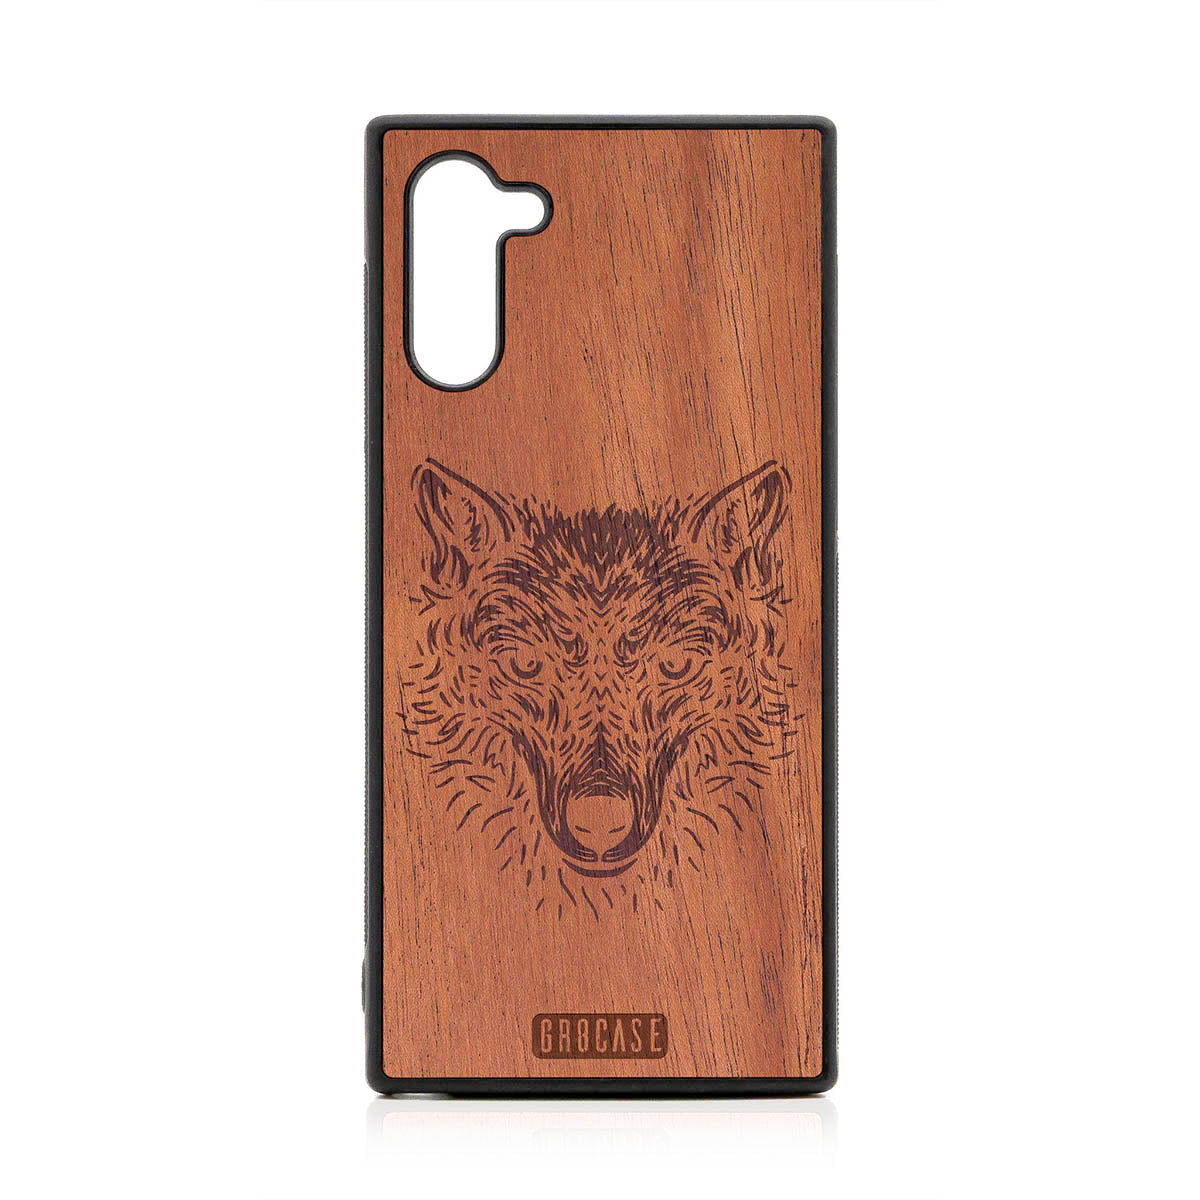 Furry Wolf Design Wood Case For Samsung Galaxy Note 10